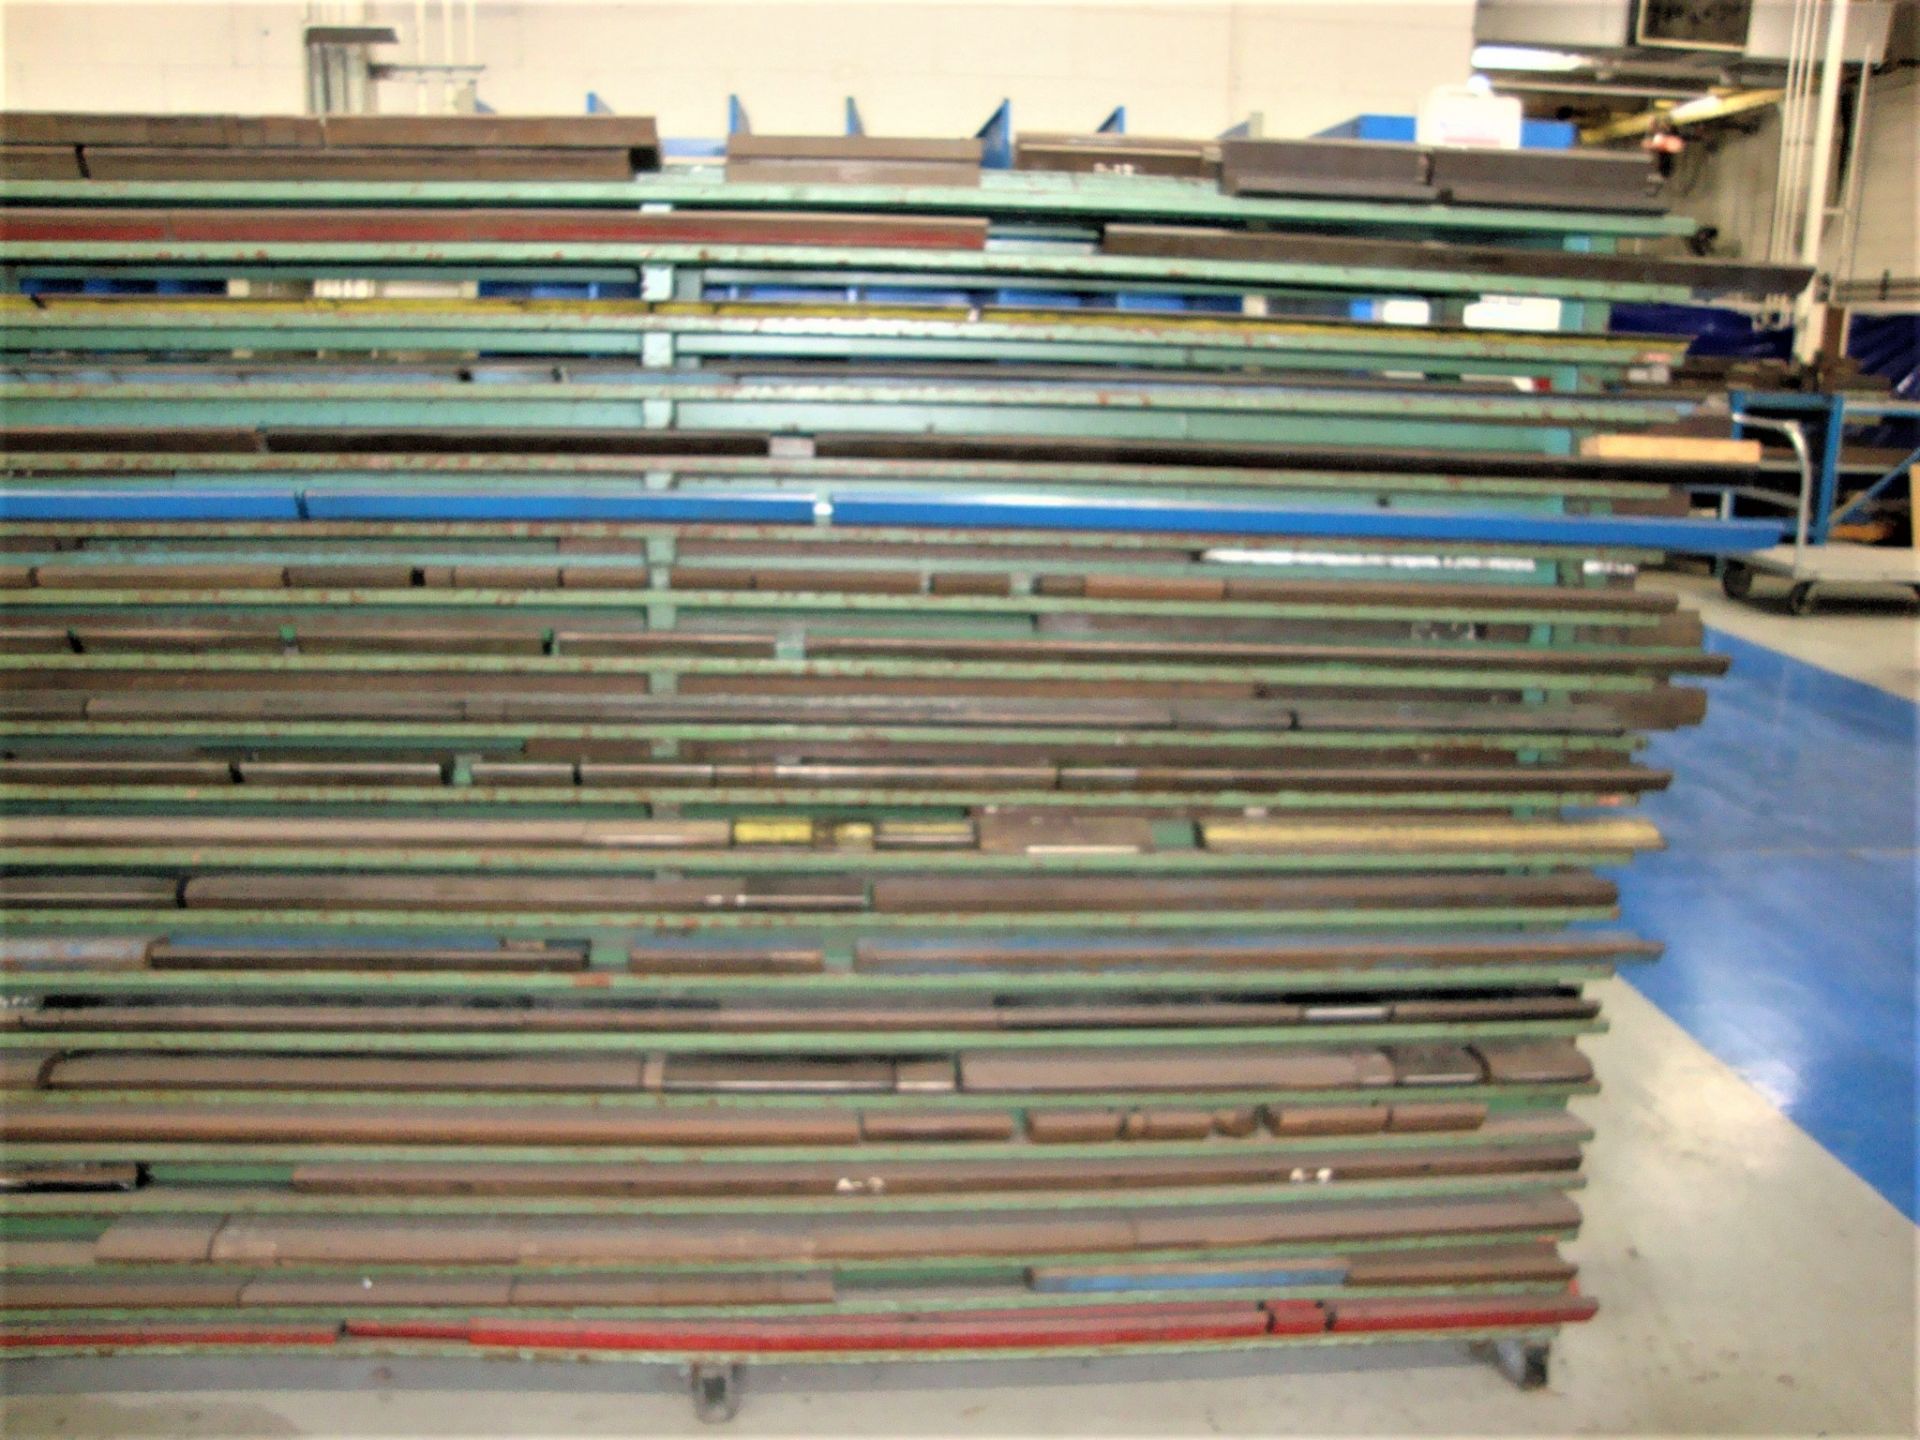 Lot of approx. 248 Assorted Press Brake Dies, up to 68" long Note-Rack NOT Included - Image 5 of 16